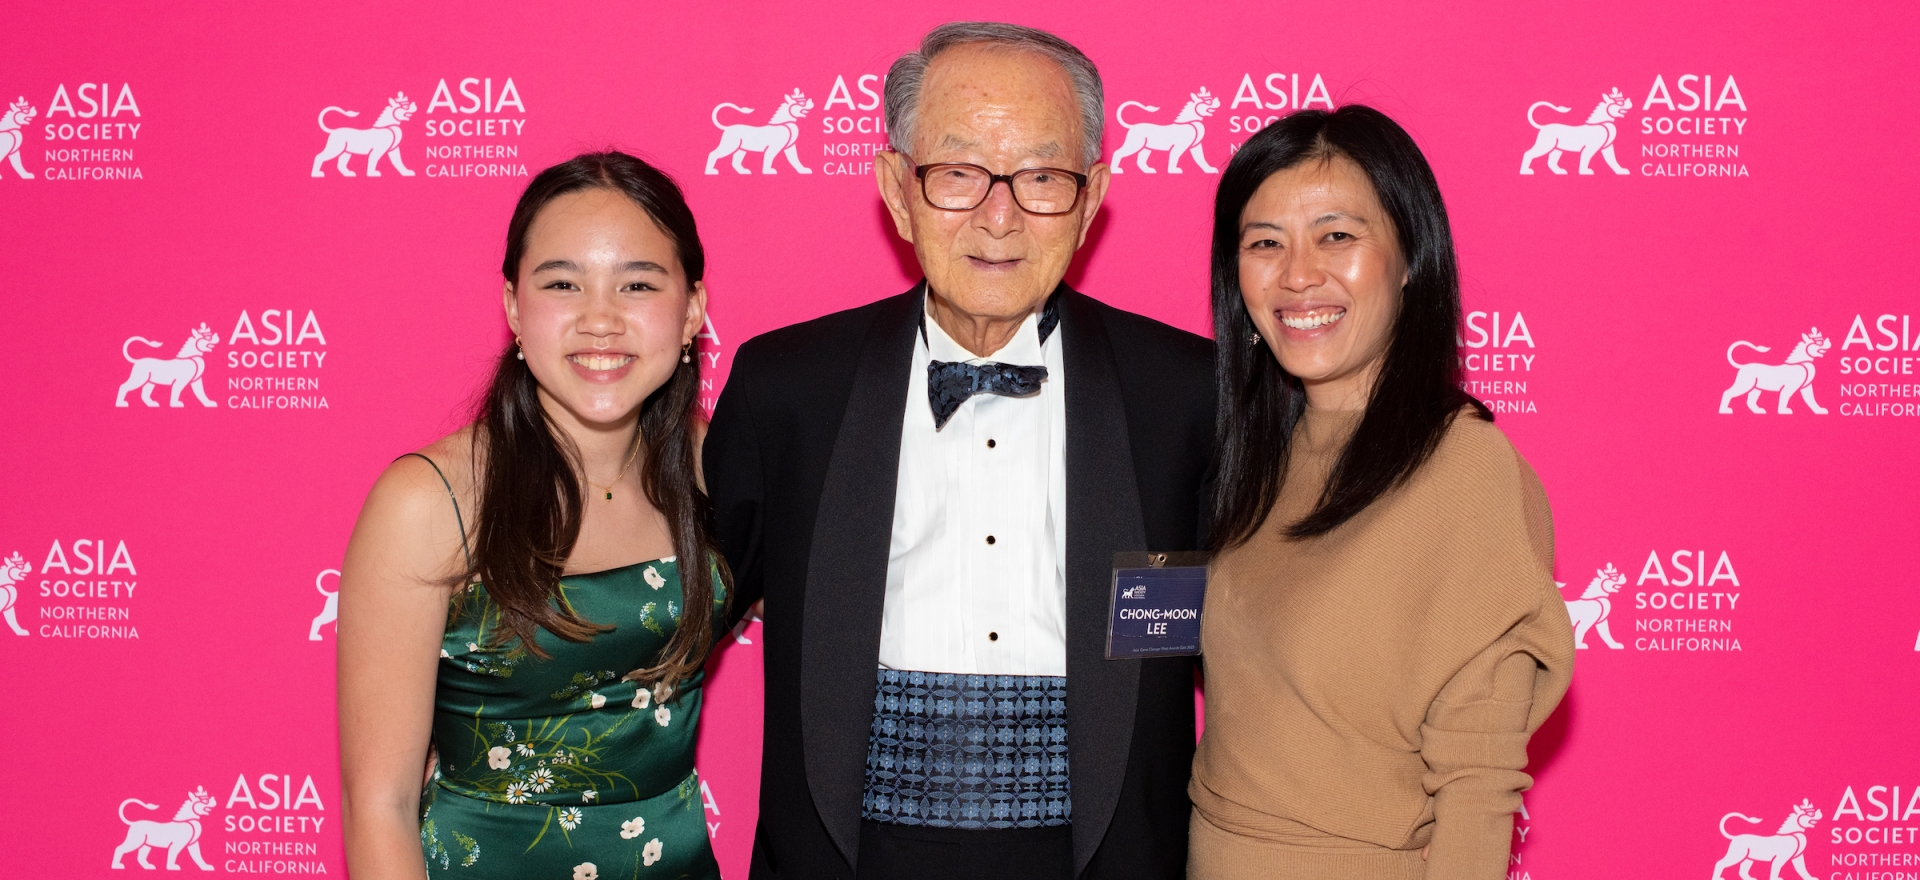 Asia Game Changer West Award Honorees Chong-Moon Lee, Tammy Ma, and Mina Fedor, Executive Director of AAPI Youth Rising pose for a photo in front of an Asia Society Northern Californa step and repeat. 